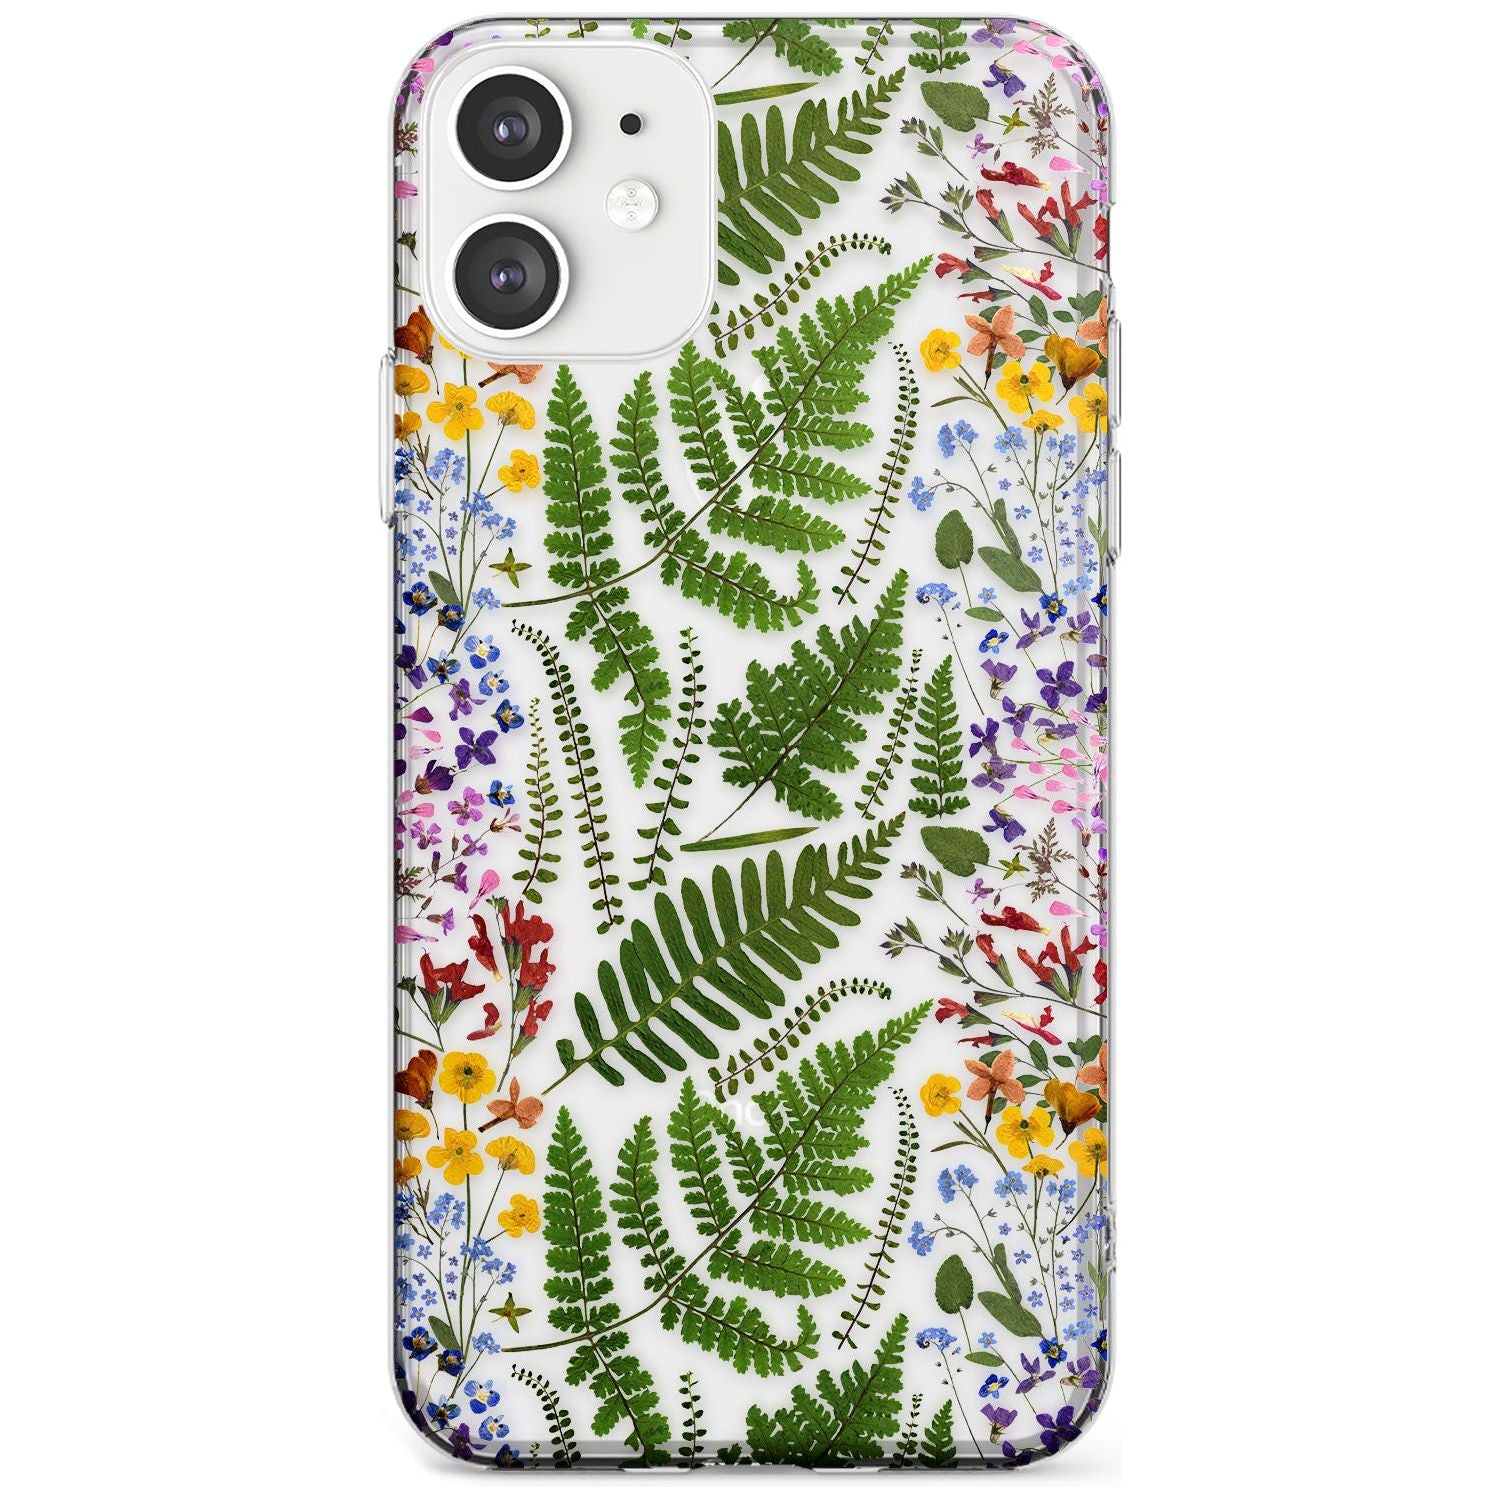 Busy Floral and Fern Design Slim TPU Phone Case for iPhone 11